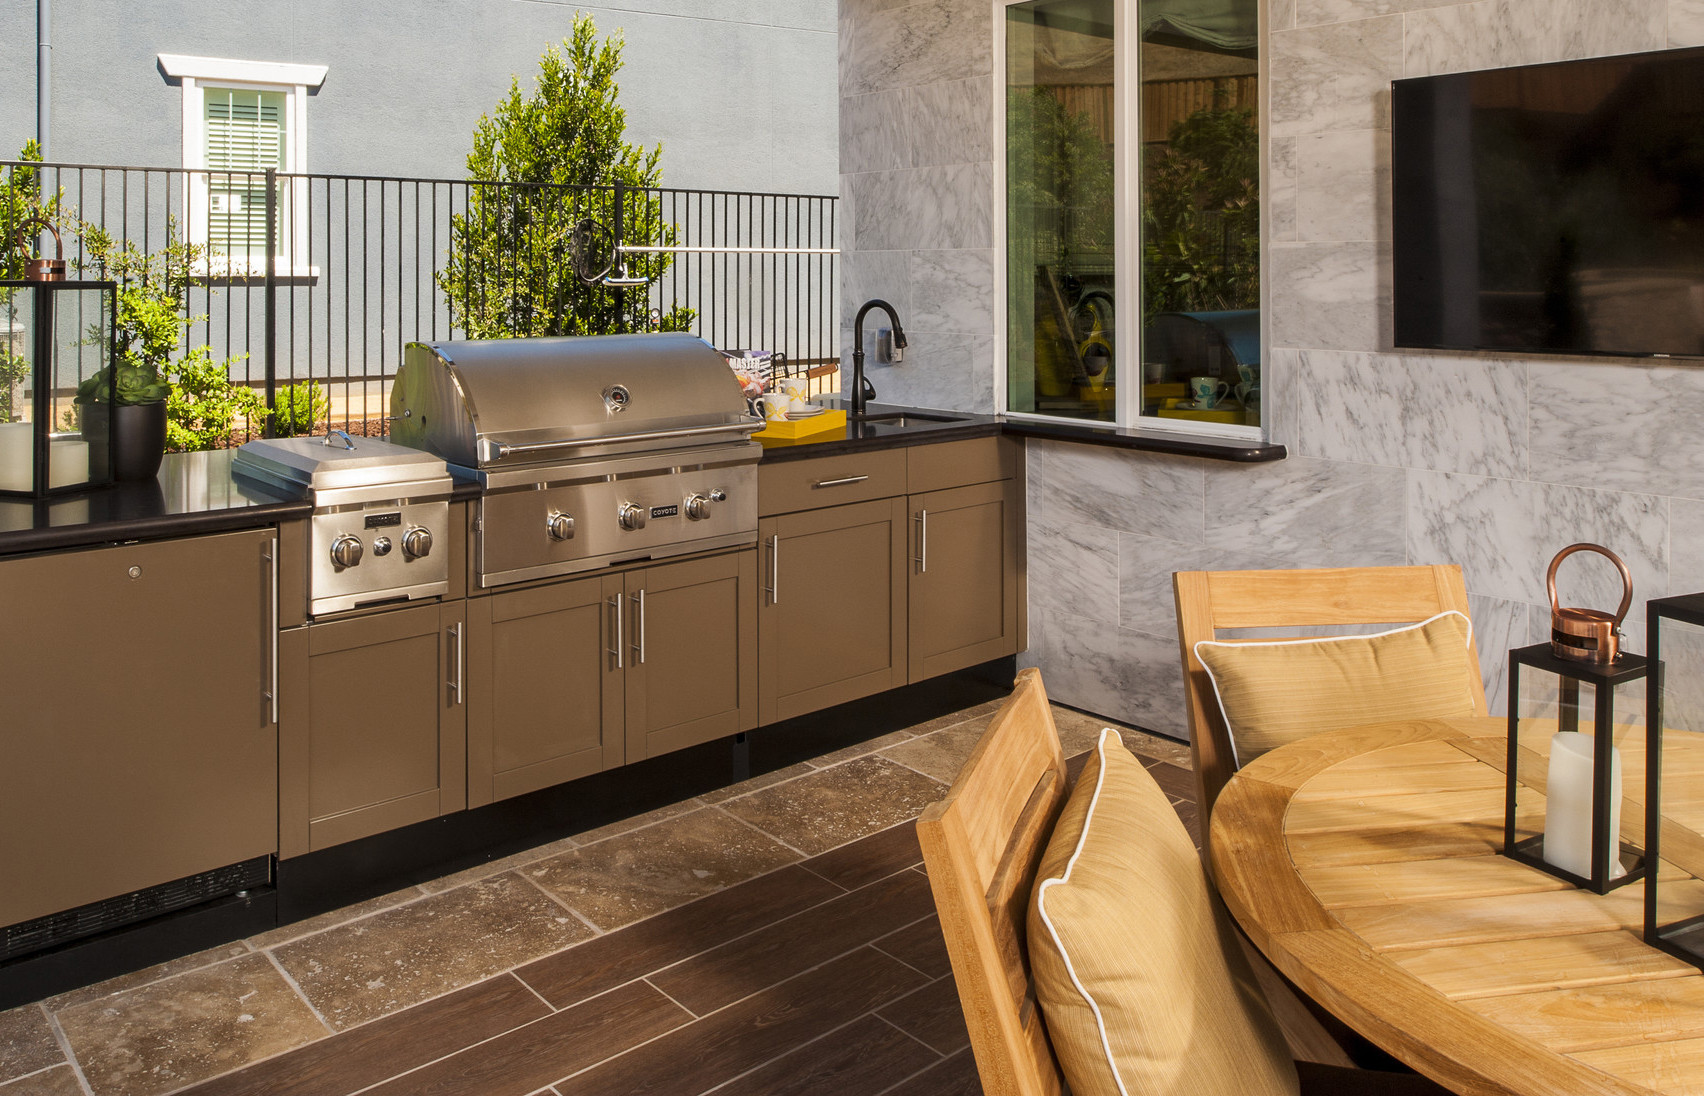 Outdoor Kitchen Cabinets Stainless Steel
 Stainless Steel Base Cabinets for Outdoor Kitchens